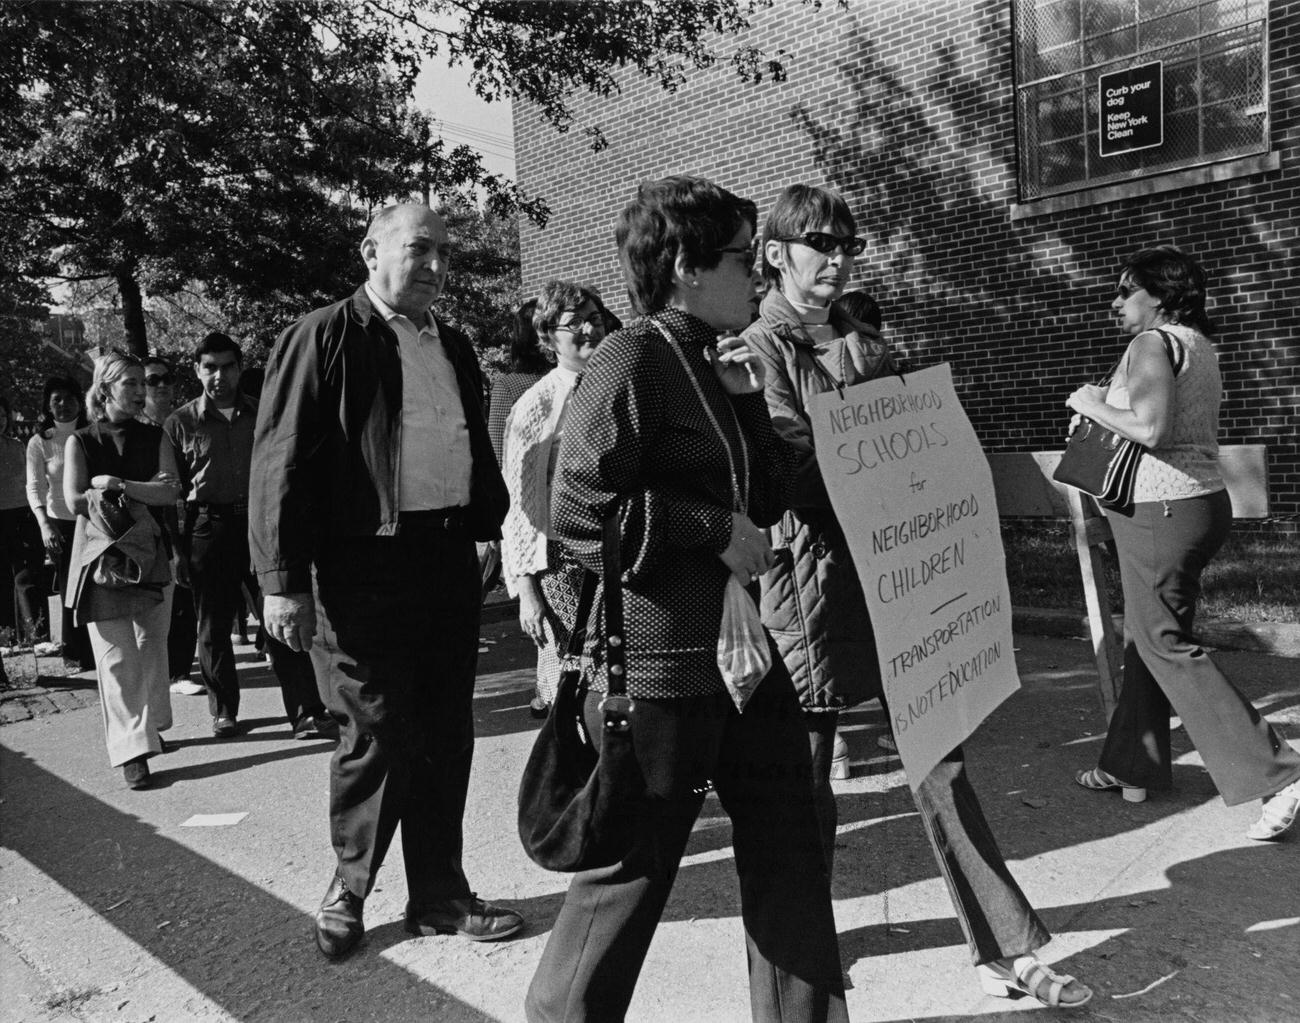 Boycott At Public School 251 Over Tilden Housing Project Admissions, Brooklyn, 1973